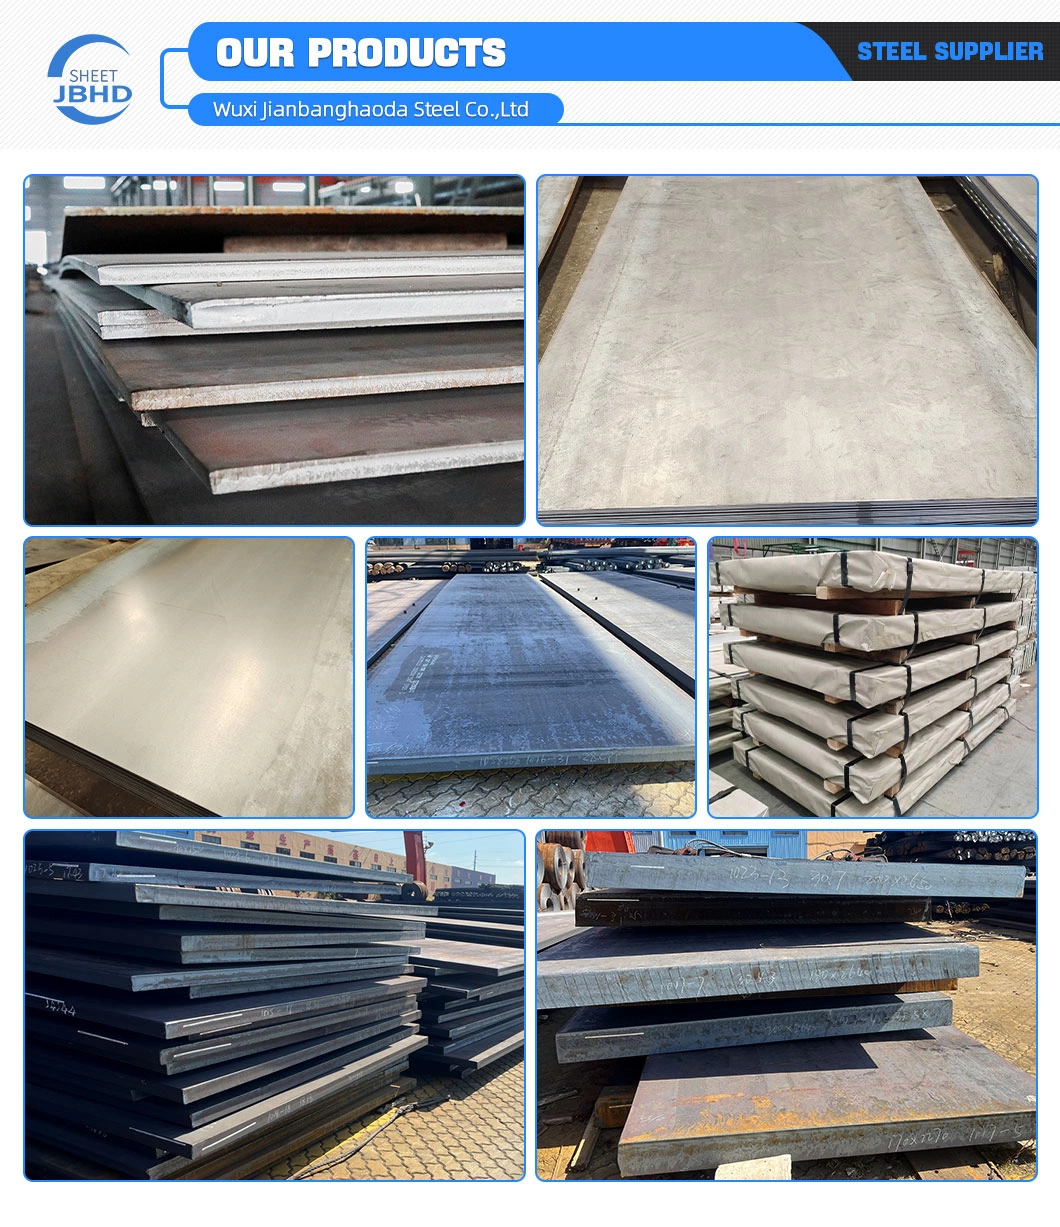 High Quality Cold Rolled Steel Plate A516 Grade 60 1018 1045 #10 Carbon Steel Sheet/Plate